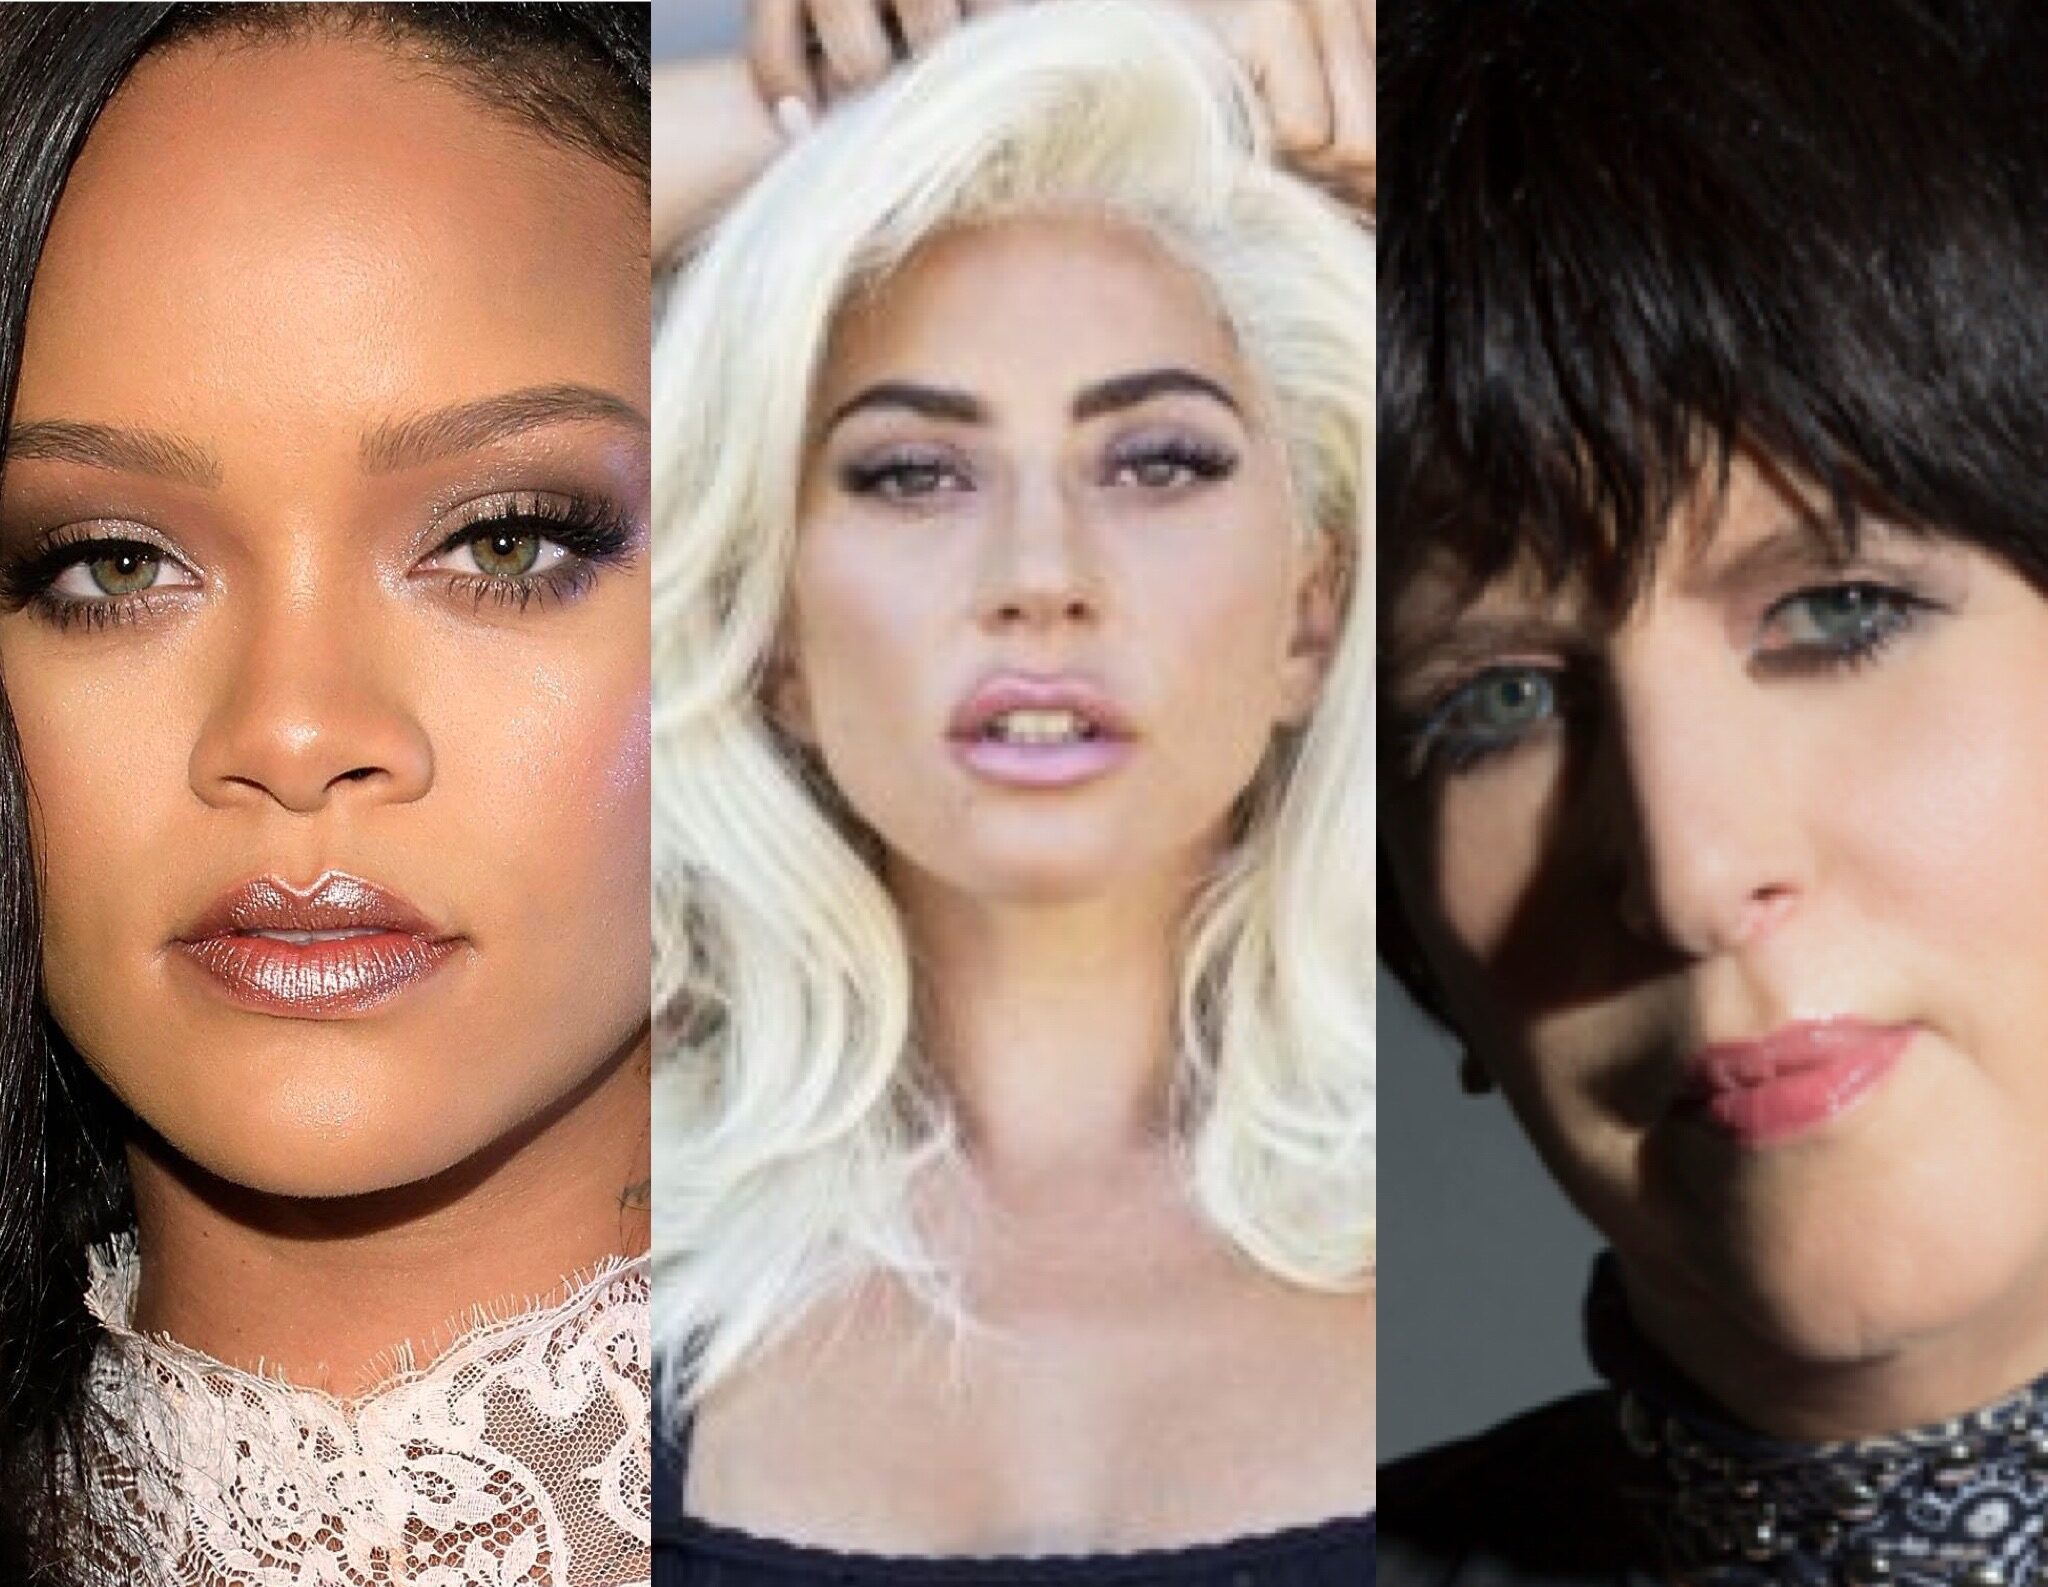 Listen to the Oscar 2023 nominees for Best Original Song; Lady Gaga, Rihanna and more